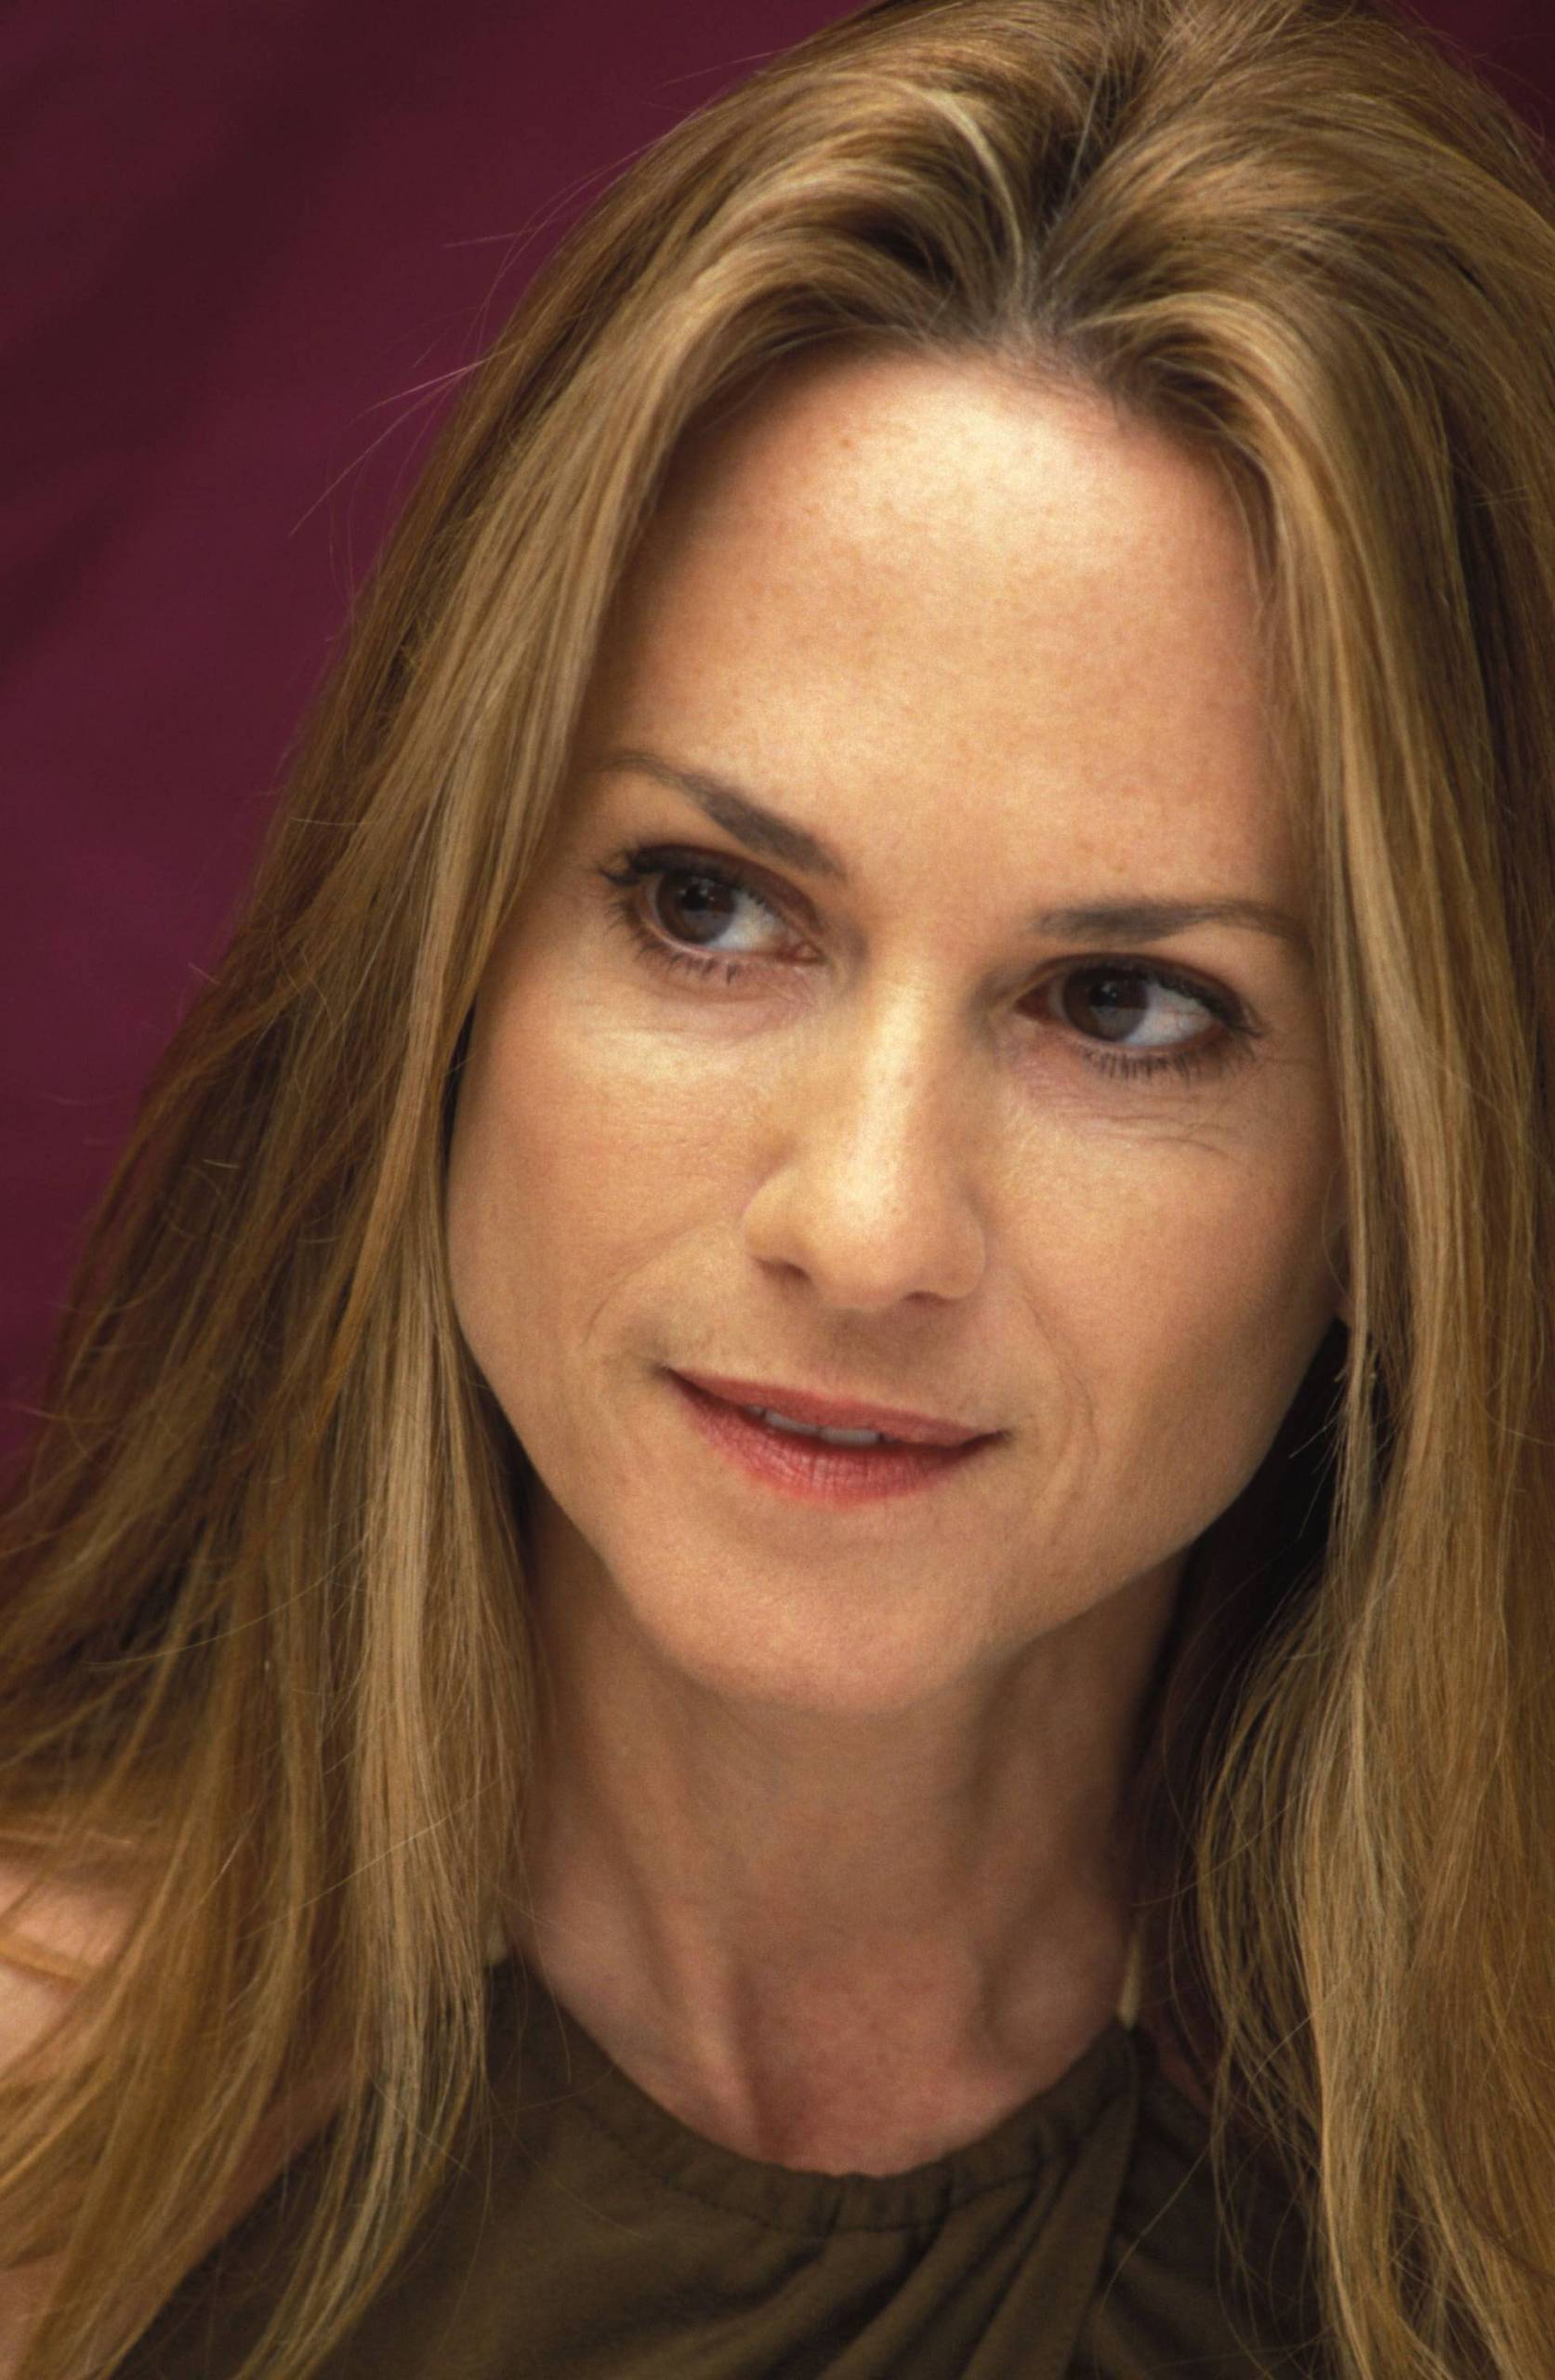 Holly Hunter Backgrounds, Compatible - PC, Mobile, Gadgets| 1673x2560 px